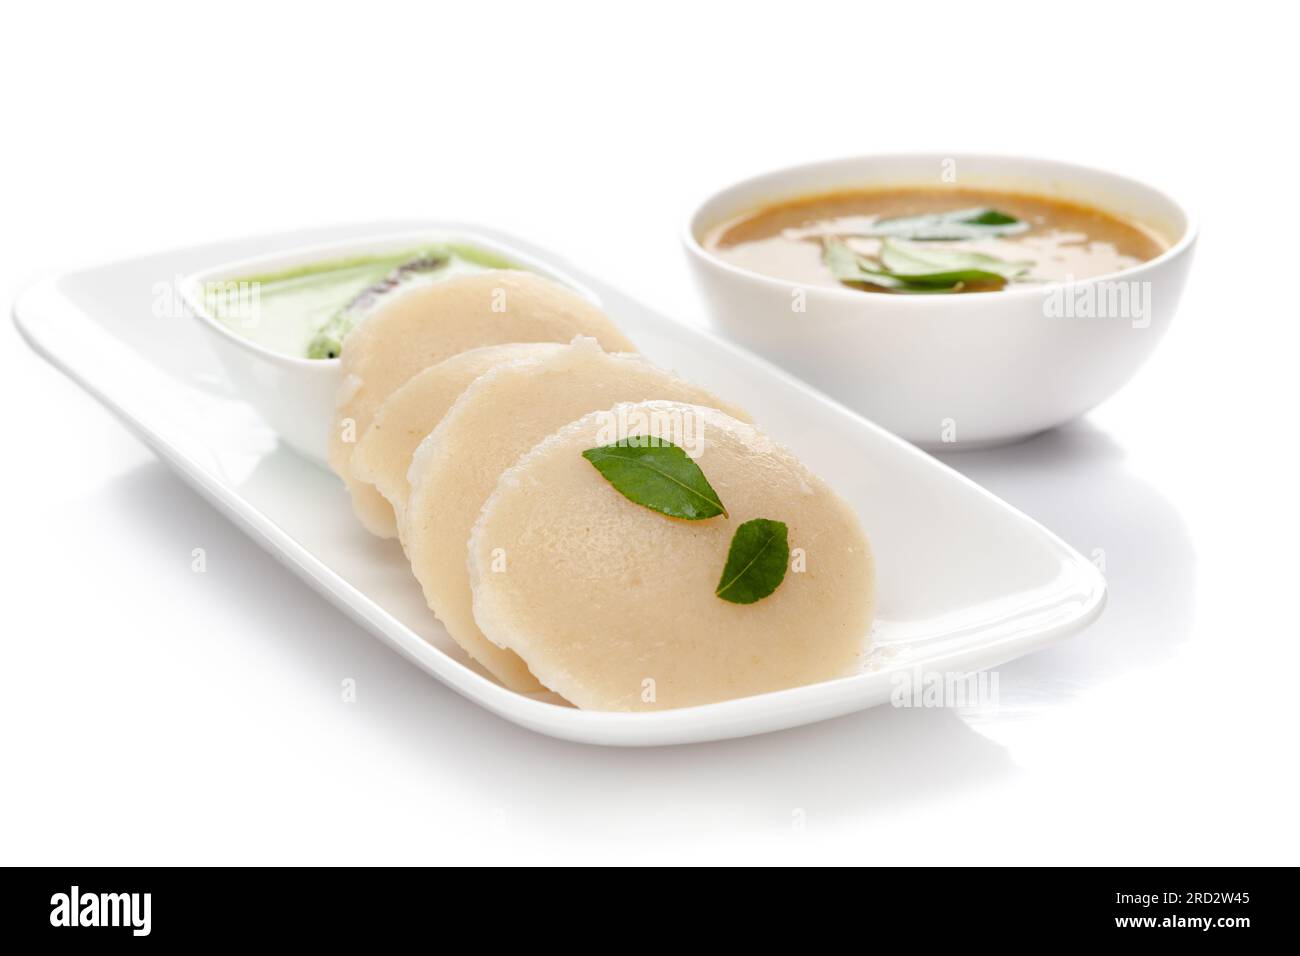 Close-up of Idli Sambhar or Idly Sambar is a popular south Indian food, served with coconut chutney. selective focus Stock Photo